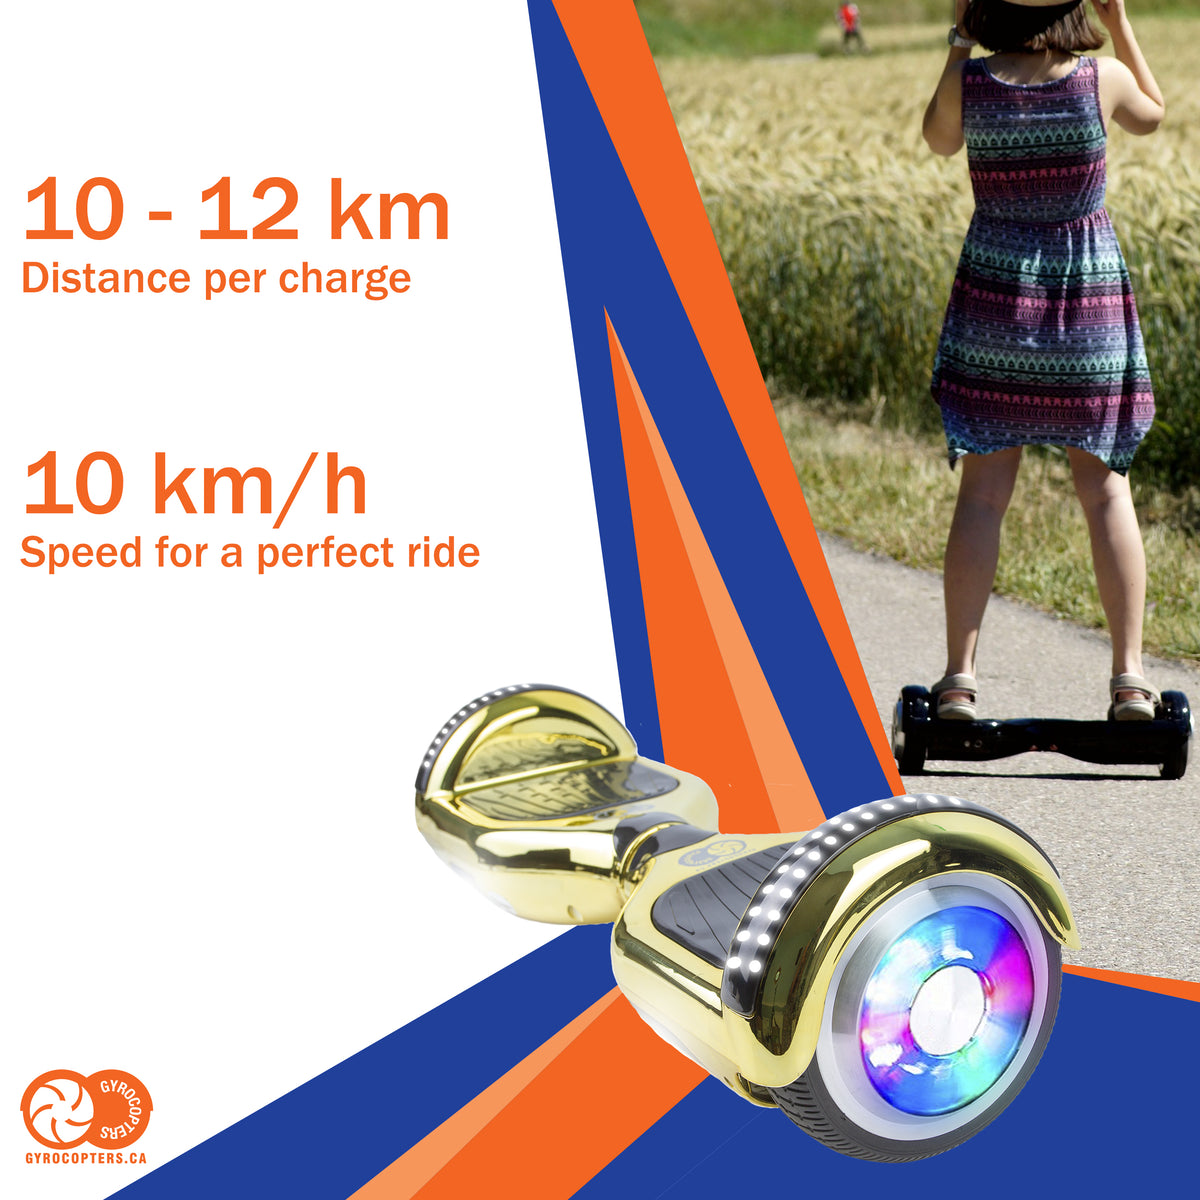 Gyrocopters Hoverboard with bluetooth speaker, hoverboard with led lights, cheap hoverboard with bluetooth, cheap hoverboard in toronto, safe hoverboard, Gyrocopters Pro 4.0 hoverboard, best hoverboards in Canada, hoverboard with app, chrome gold hoverboard, gold hoverboard